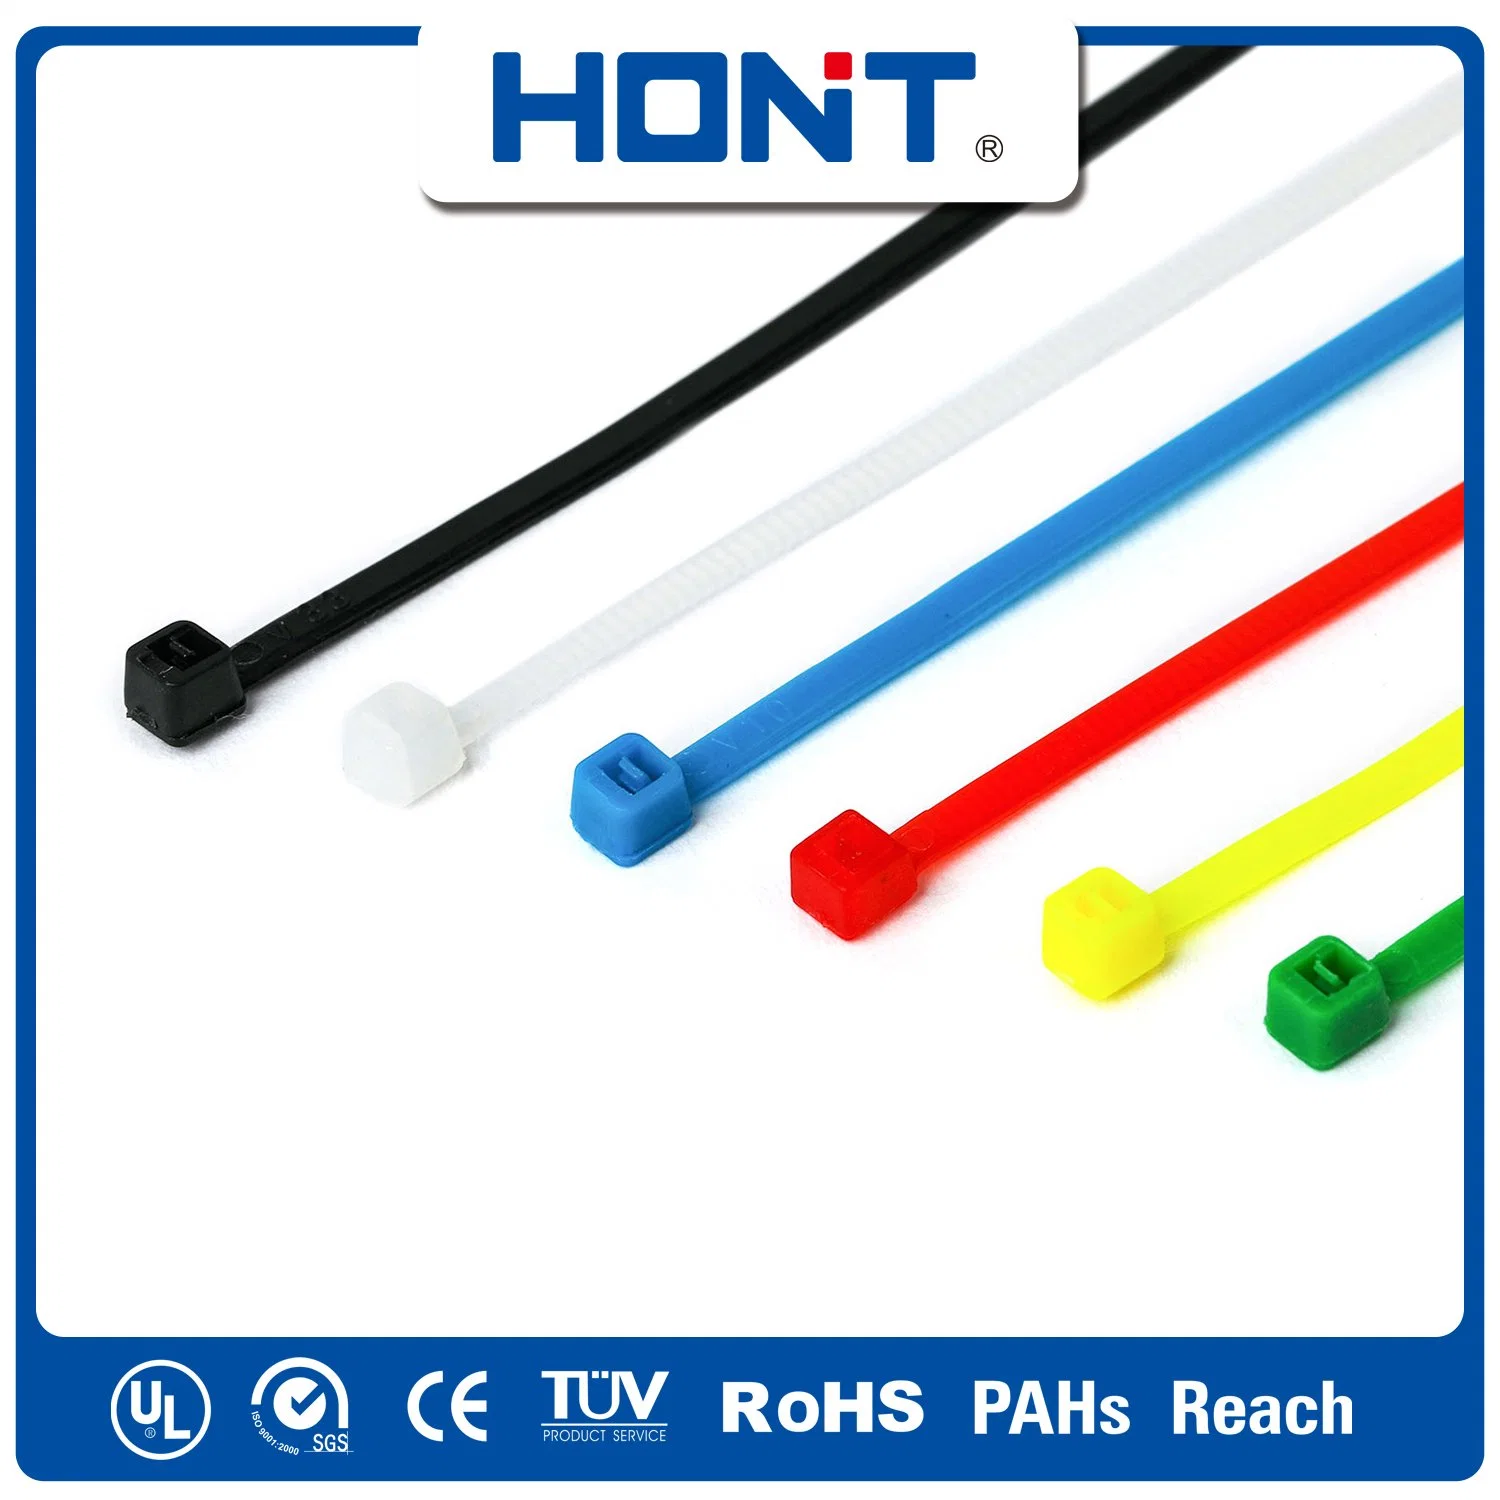 Self-Locking Tie Hont Plastic Bag + Sticker Exporting Carton/Tray Clip Cable Accessories with ISO